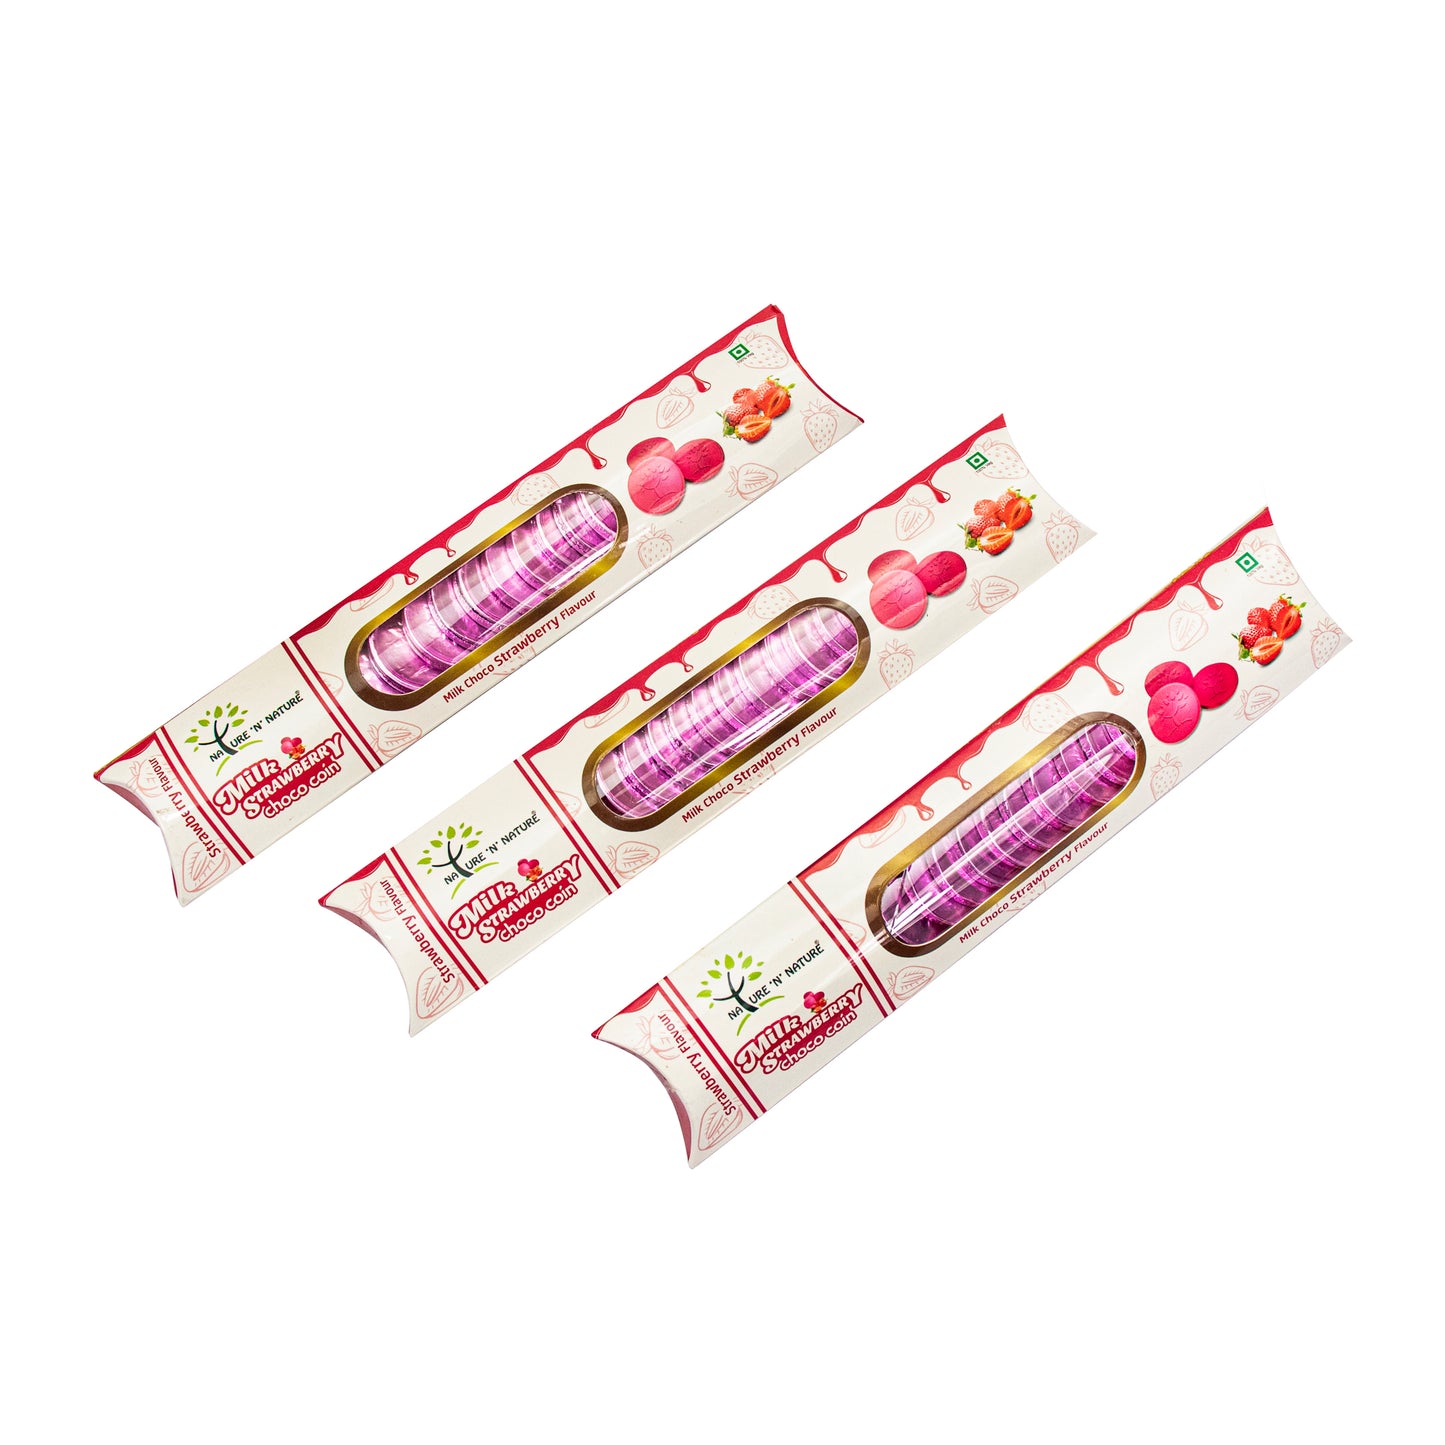 NATURE 'N' NATURE Pink Coin STRAWBERRY Milk Chocolate, 45 Grams Pink Coin Chocolate Strip pack, Pack Of 3